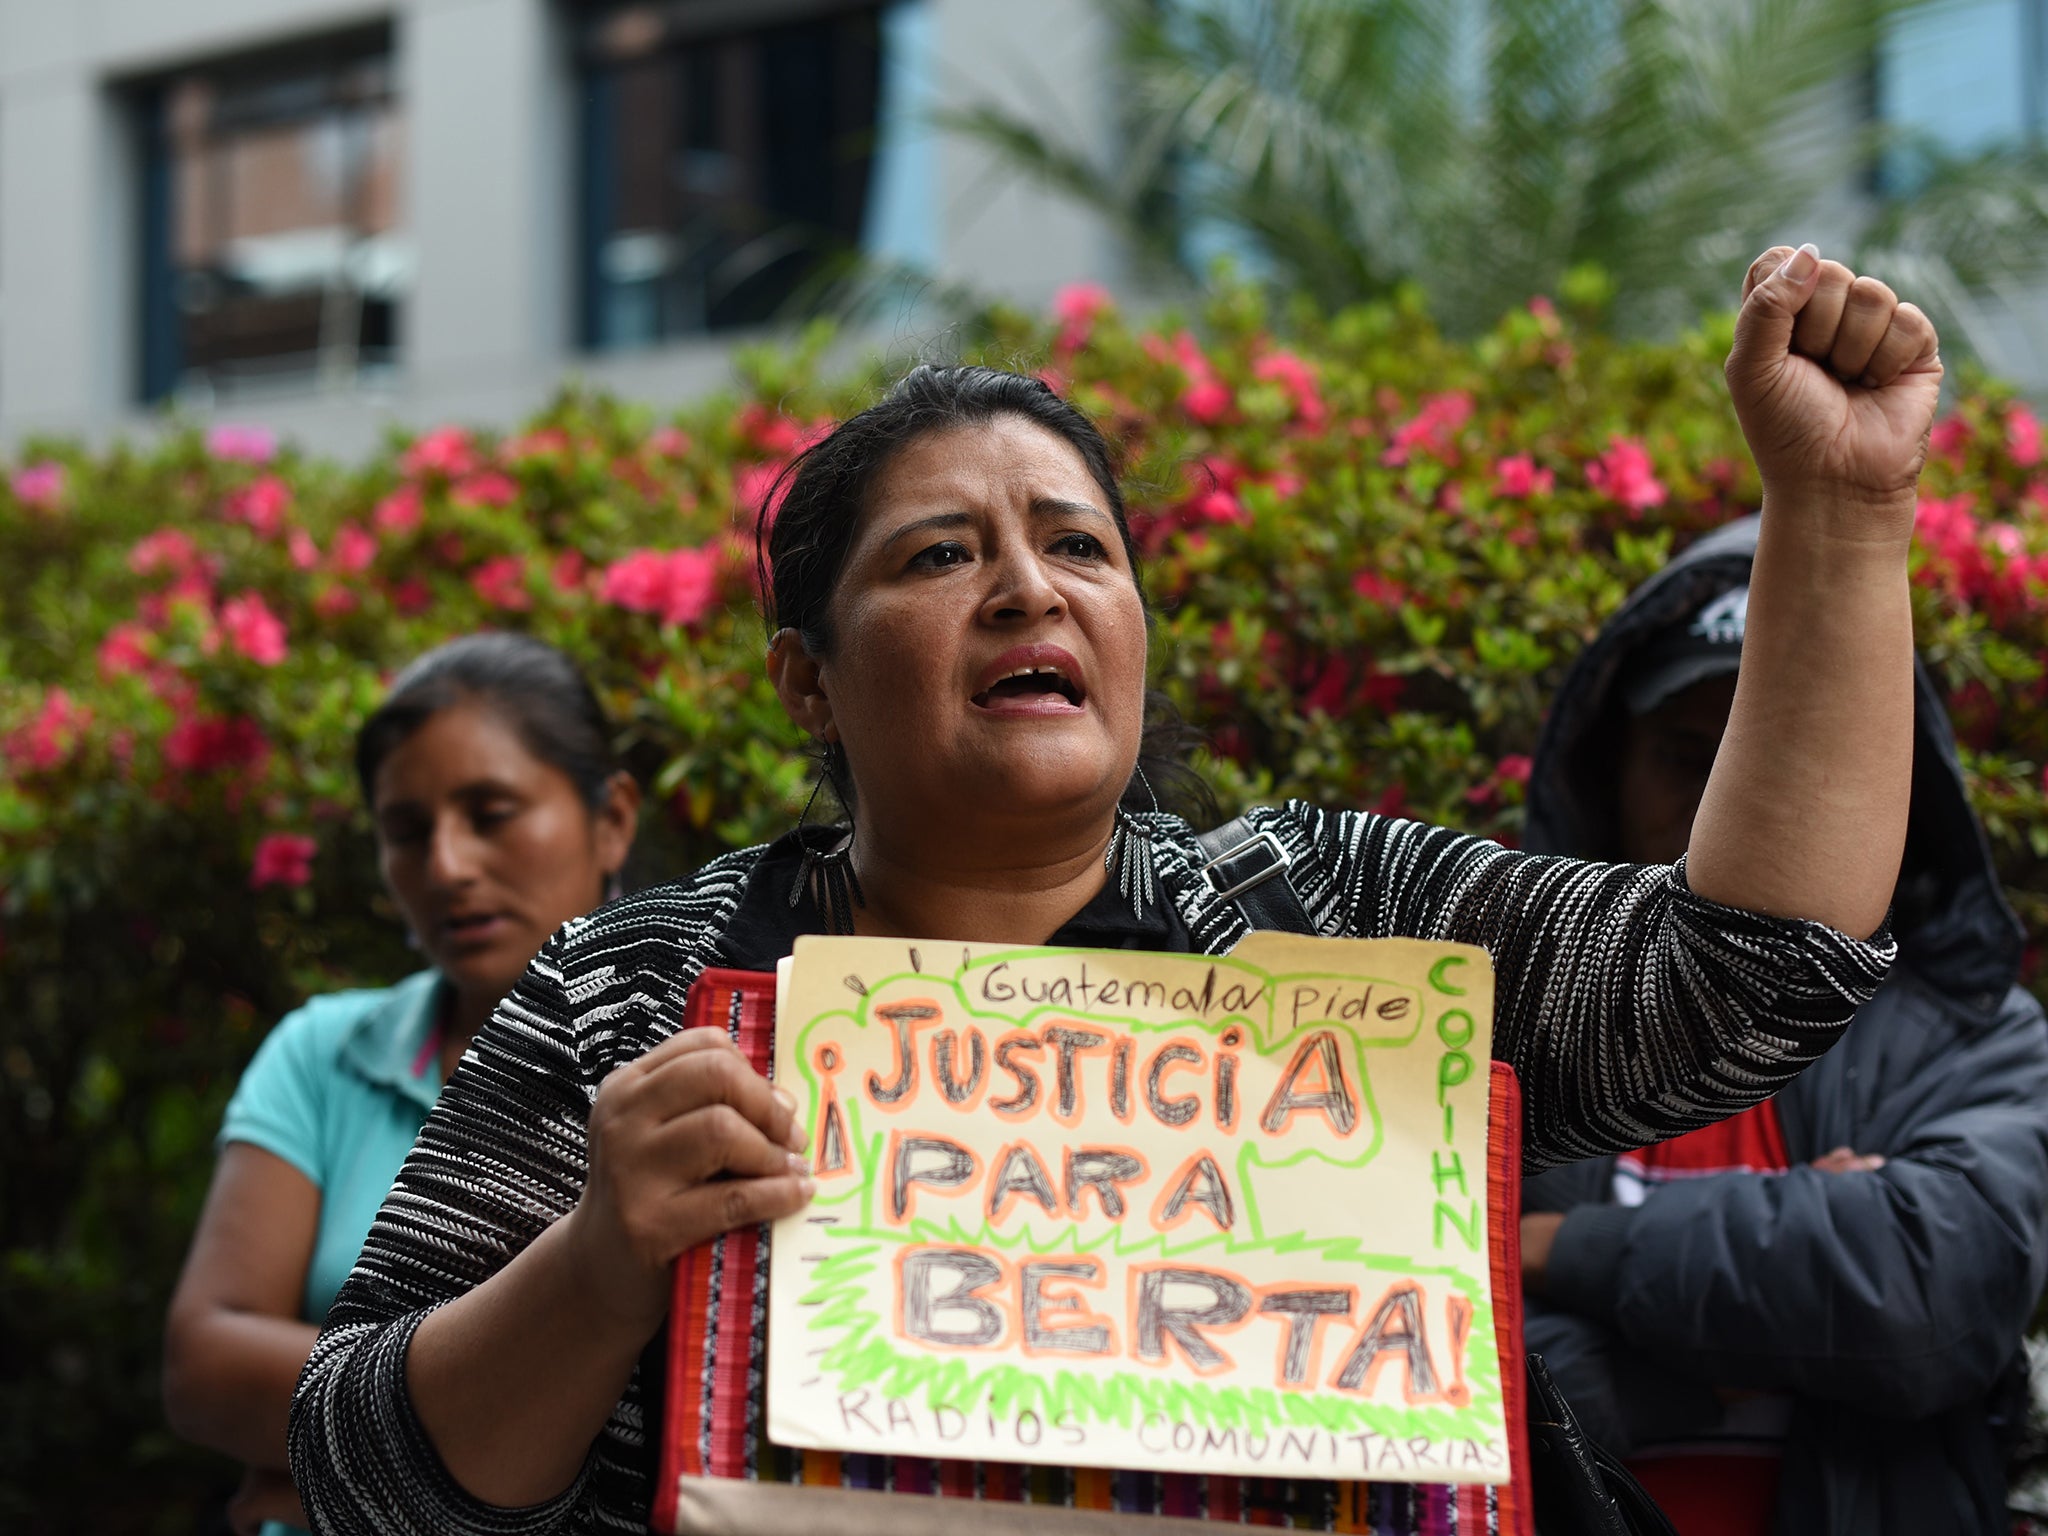 Environmental and human rights activist protest against the murder of Honduran environmental activist Berta Caceres over her opposition to a hydroelectric dam